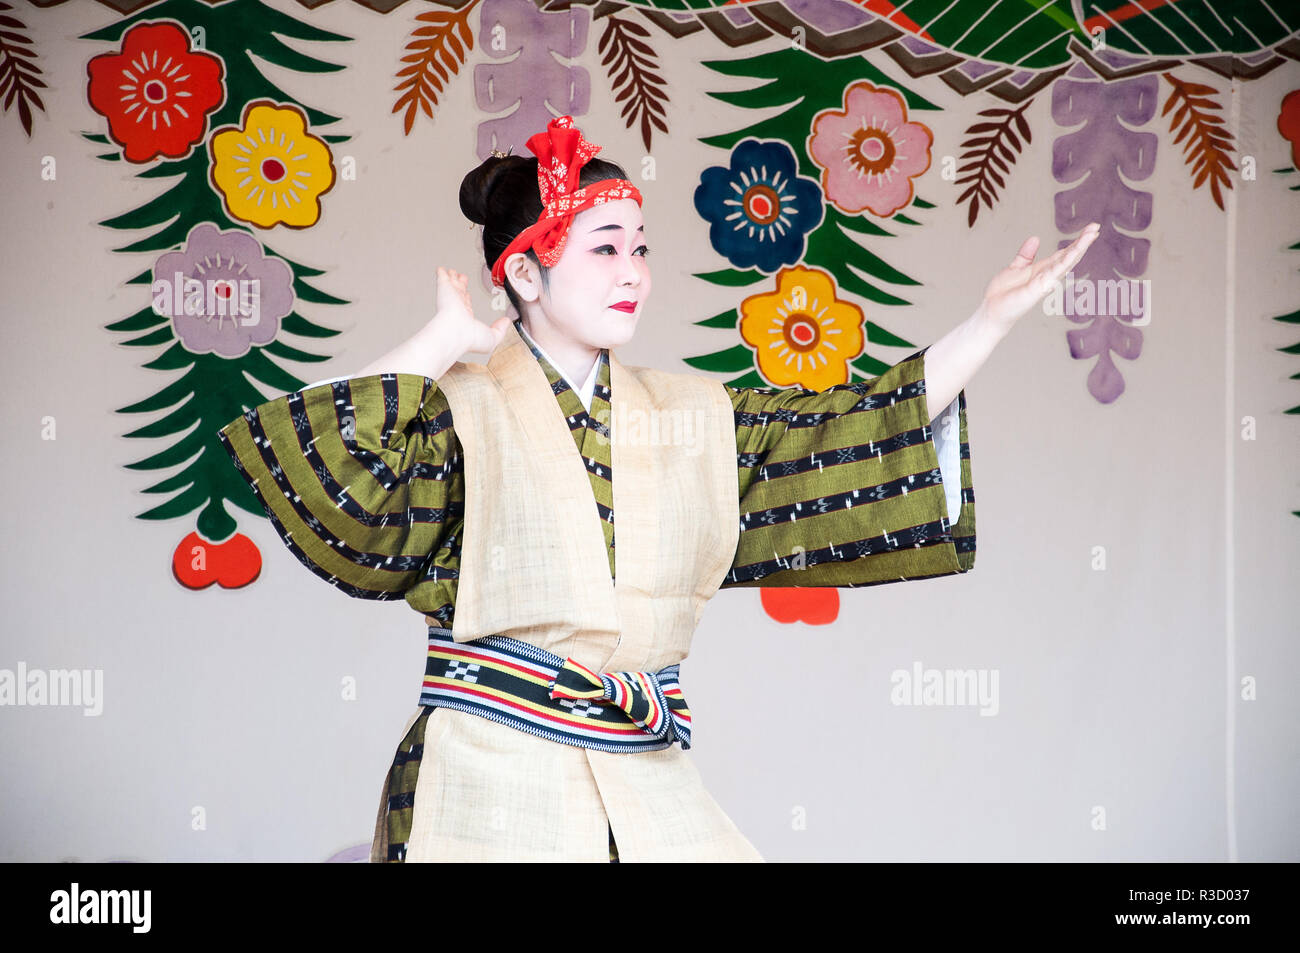 Okinawa, Japan - March 10, 2013 : Unidentified female dancer performing Okinawa traditional dance at Shuri Castle Stock Photo